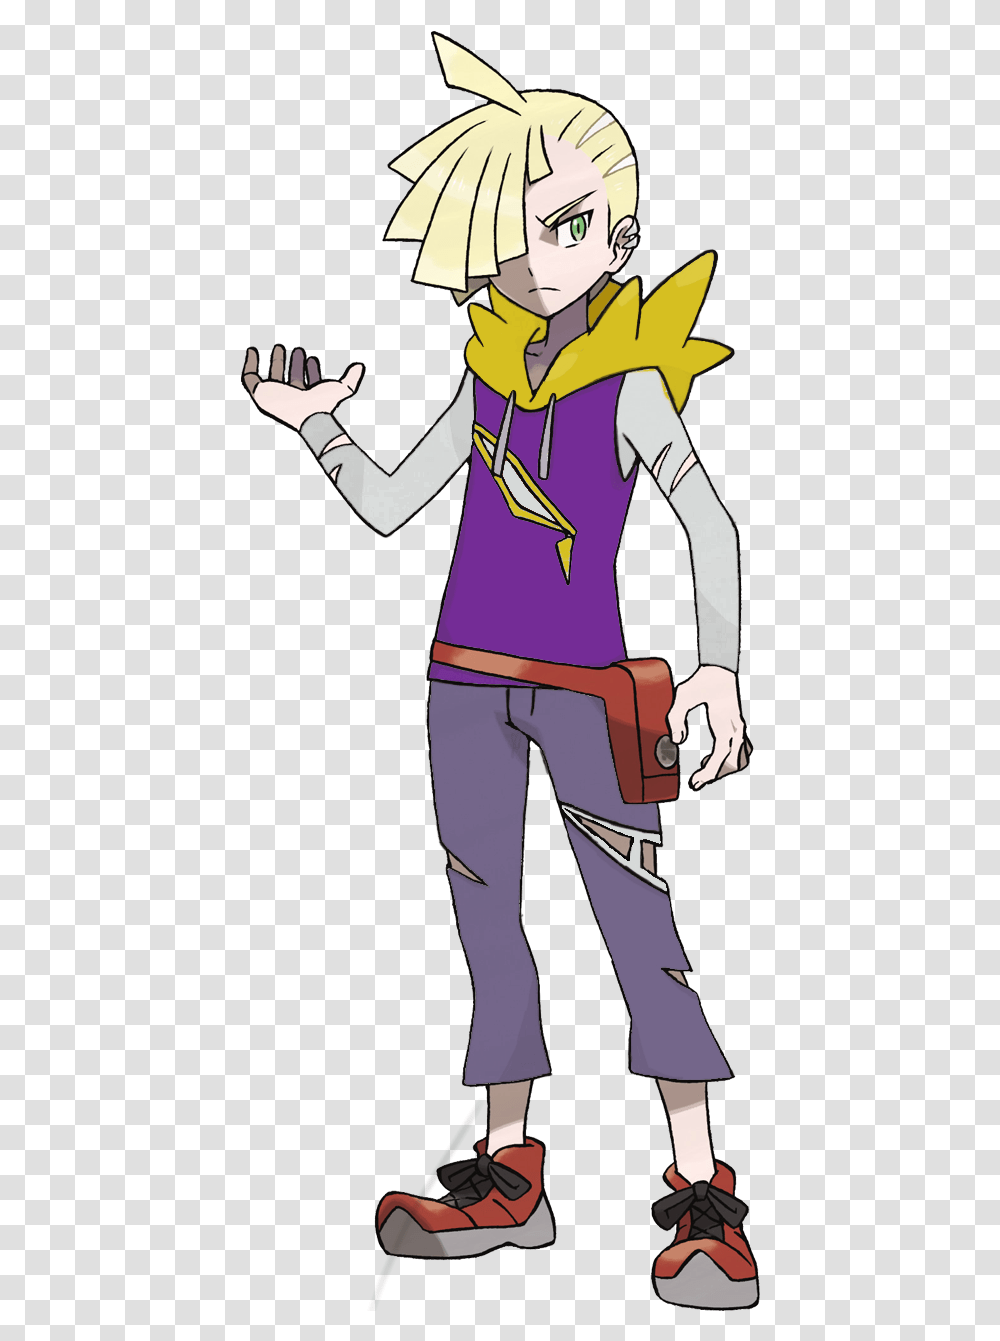 Favorite Paper Mario Character Gladion Draw Lillie From Pokemon, Clothing, Person, Sleeve, Helmet Transparent Png